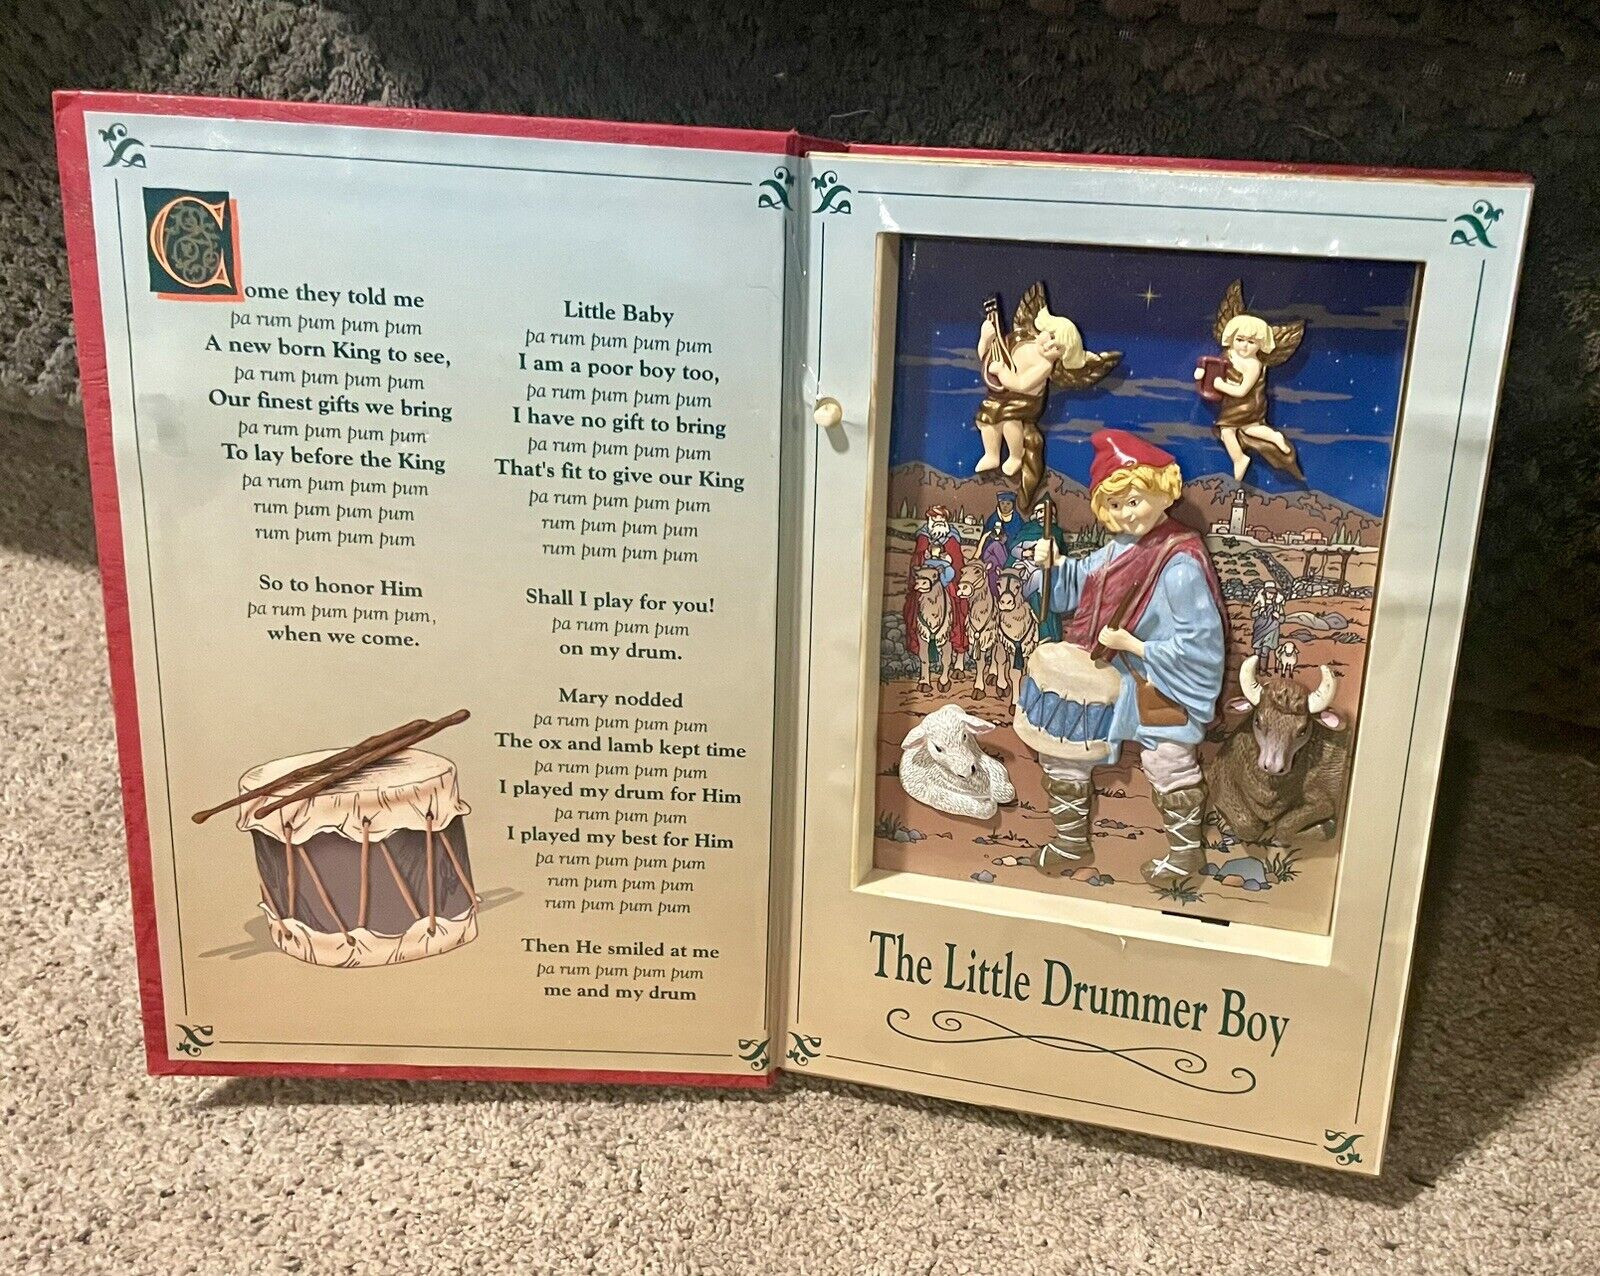 Working Rare - 2002 Mr. Christmas ~The Little Drummer Boy~ Animated Musical Book